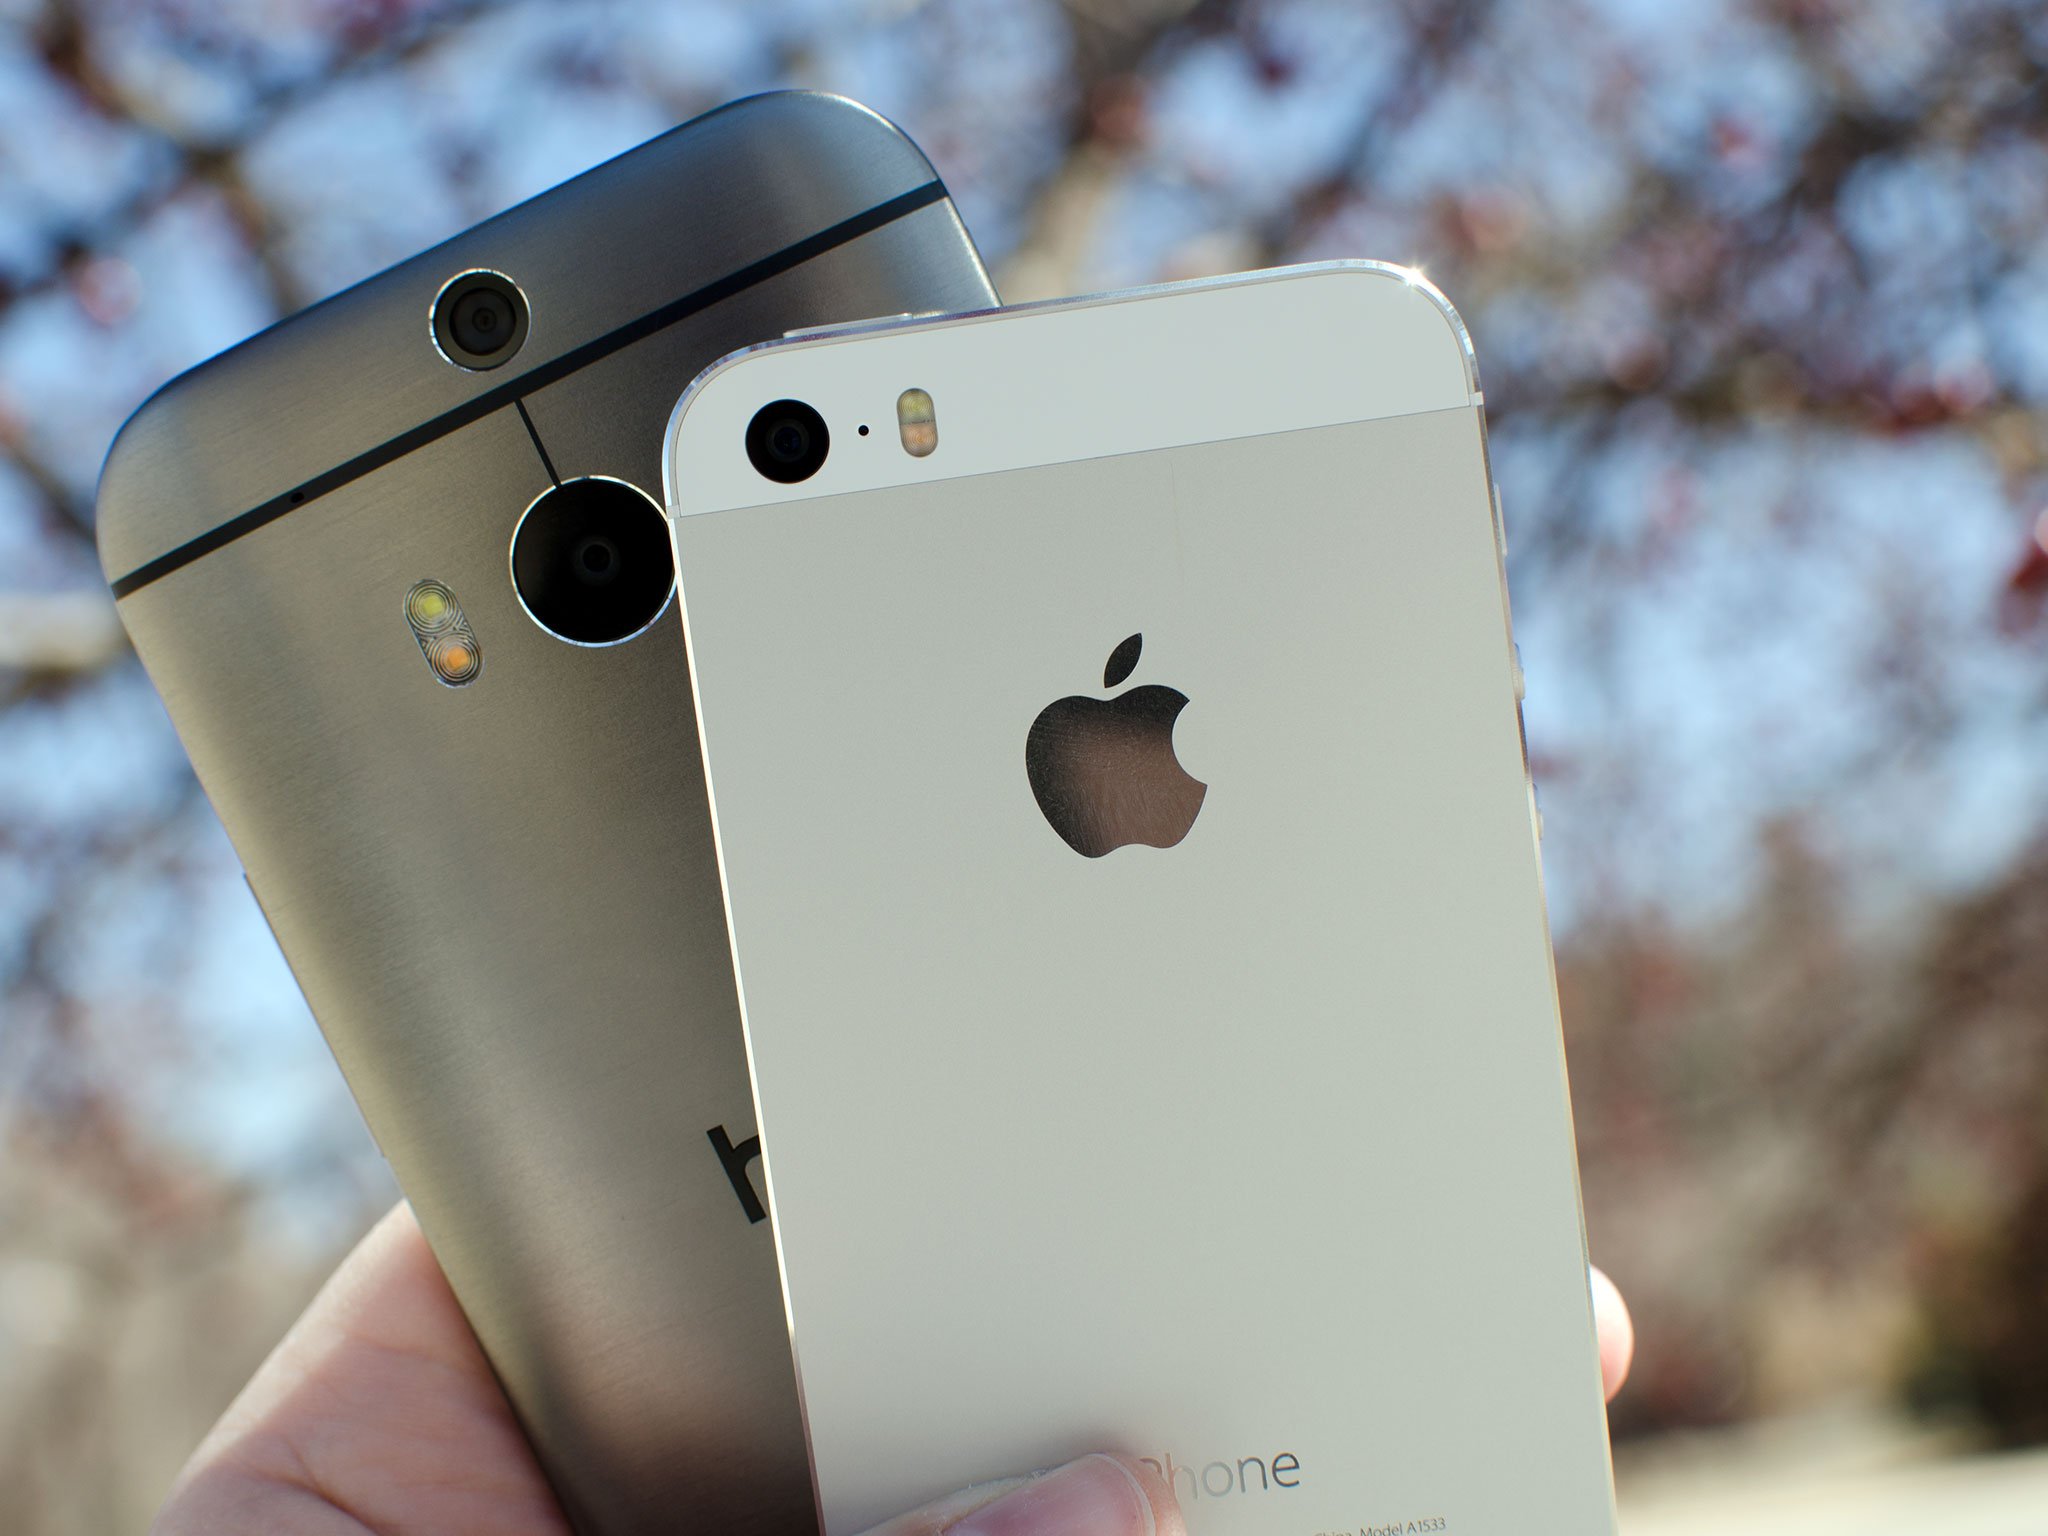 Vies barbecue Correctie iPhone 5s vs. HTC One M8: Camera shootout! | iMore